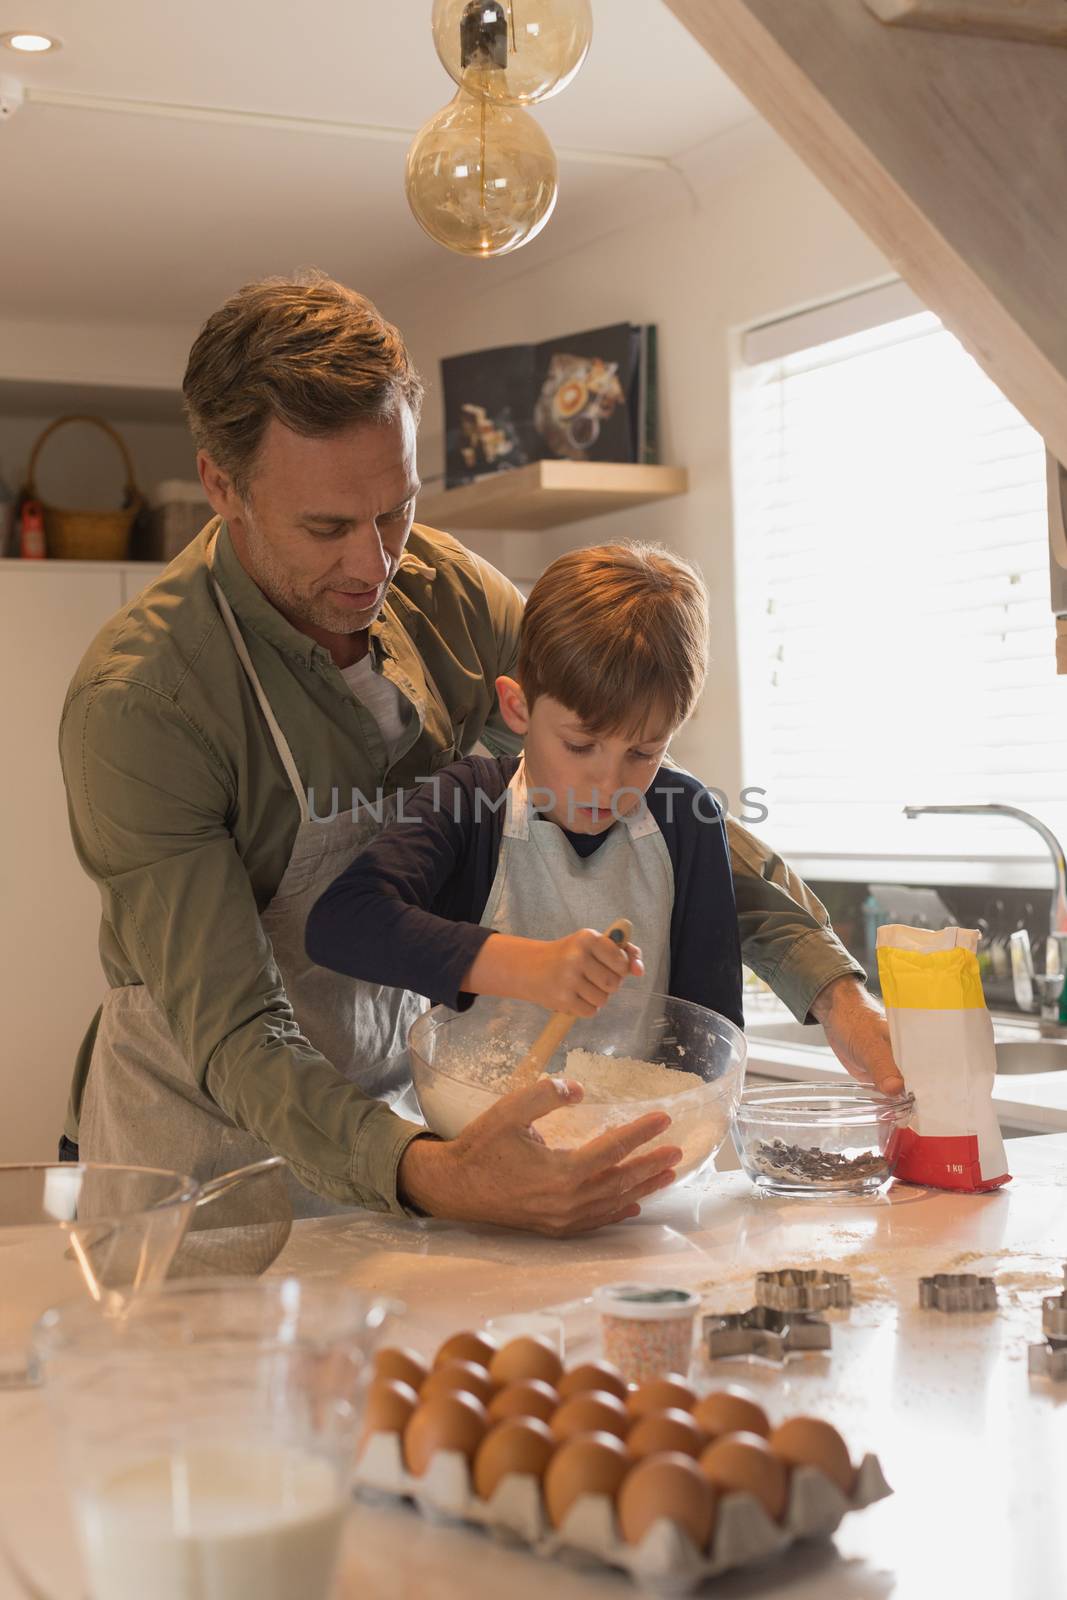 Father with his son preparing food in kitchen by Wavebreakmedia